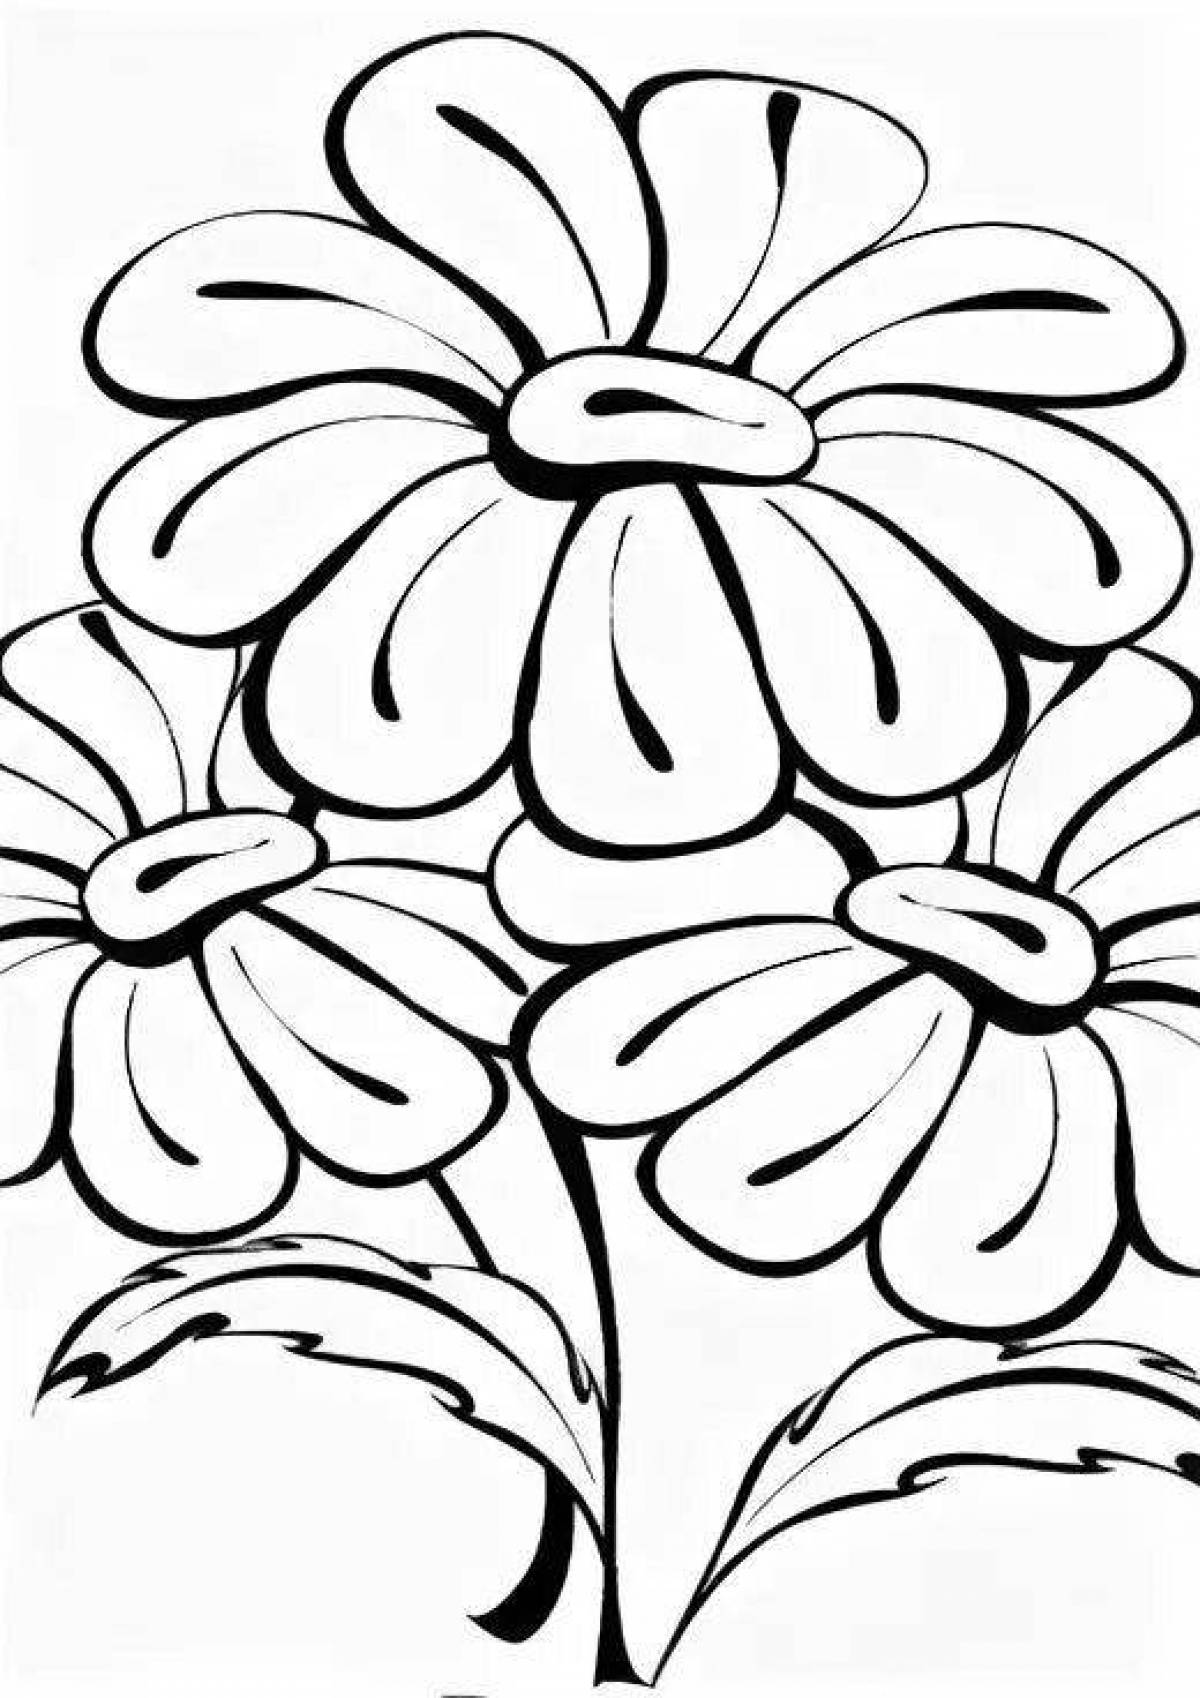 Coloring book inviting bouquet of daisies